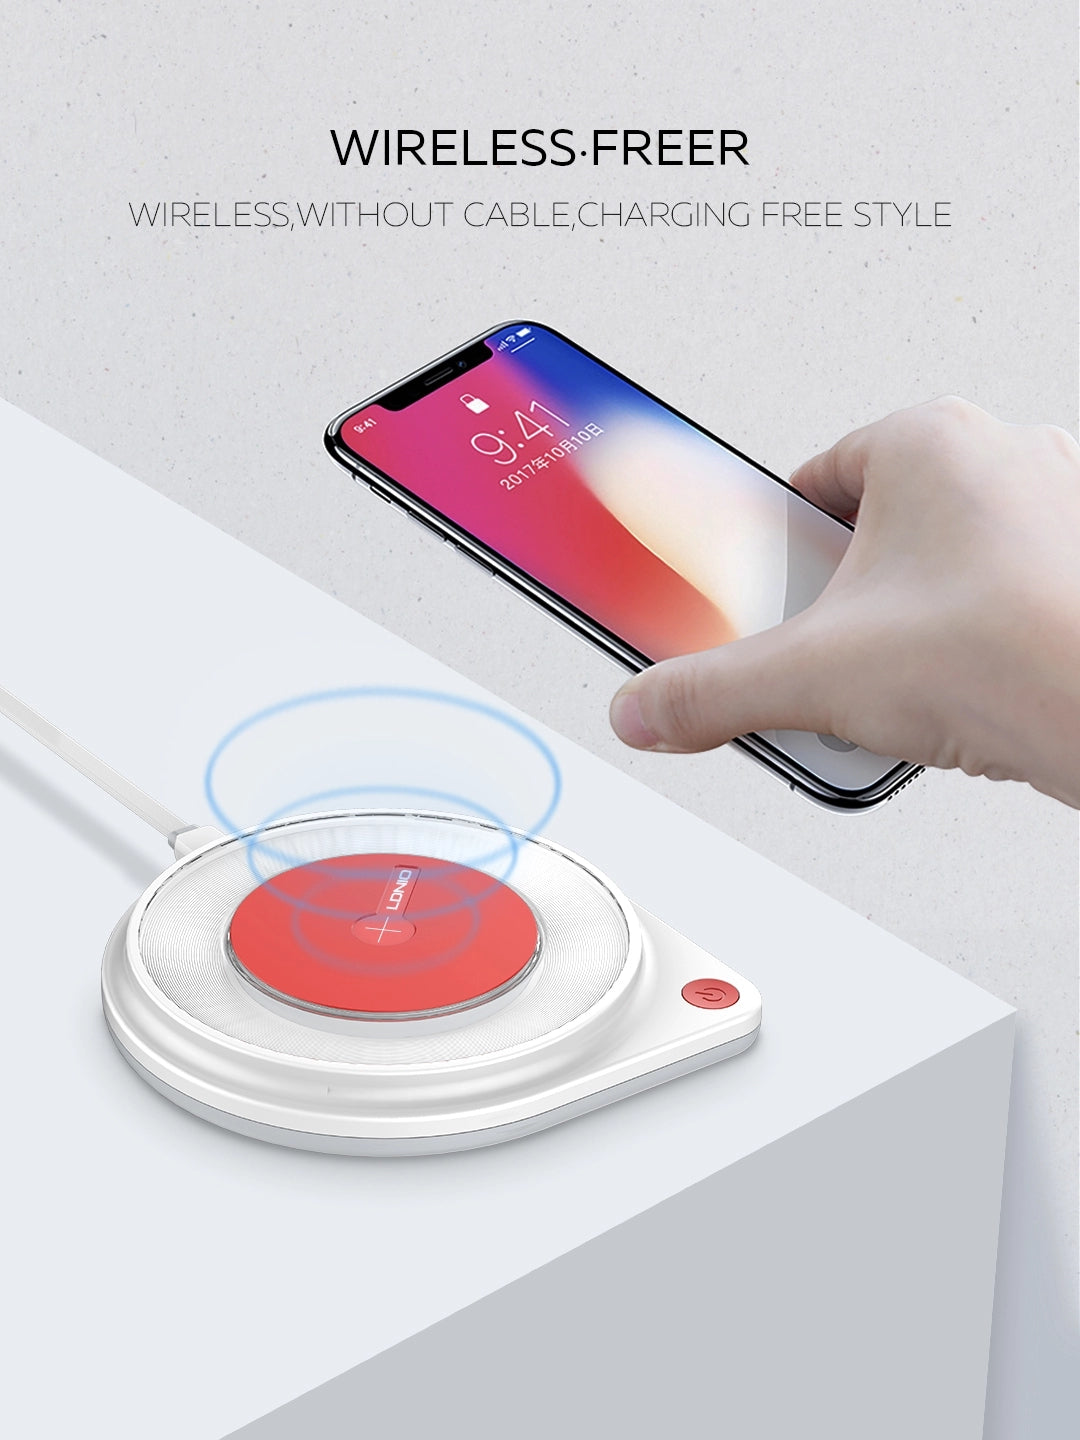 LDNIO AW001 10W Fast Wireless Charger Charging Pad with Built-in